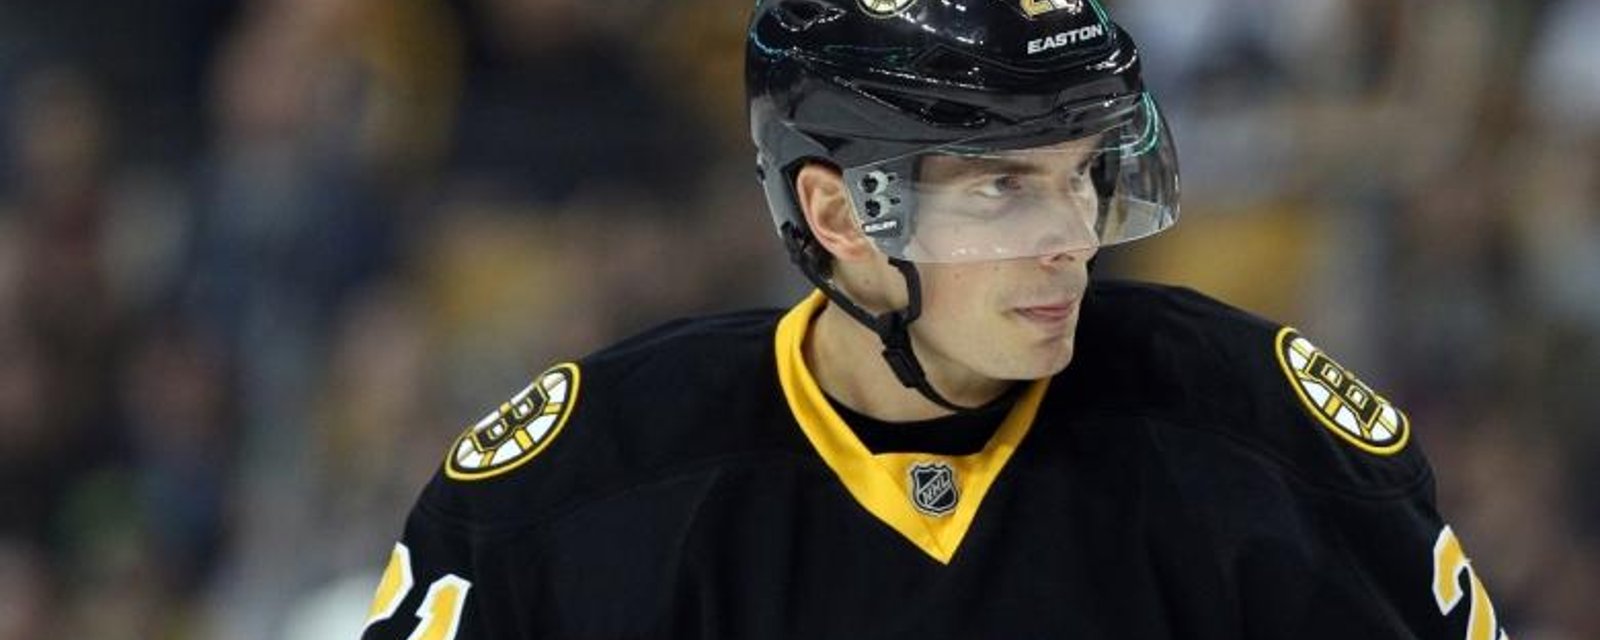 It's not looking good for Boston and Loui Eriksson.